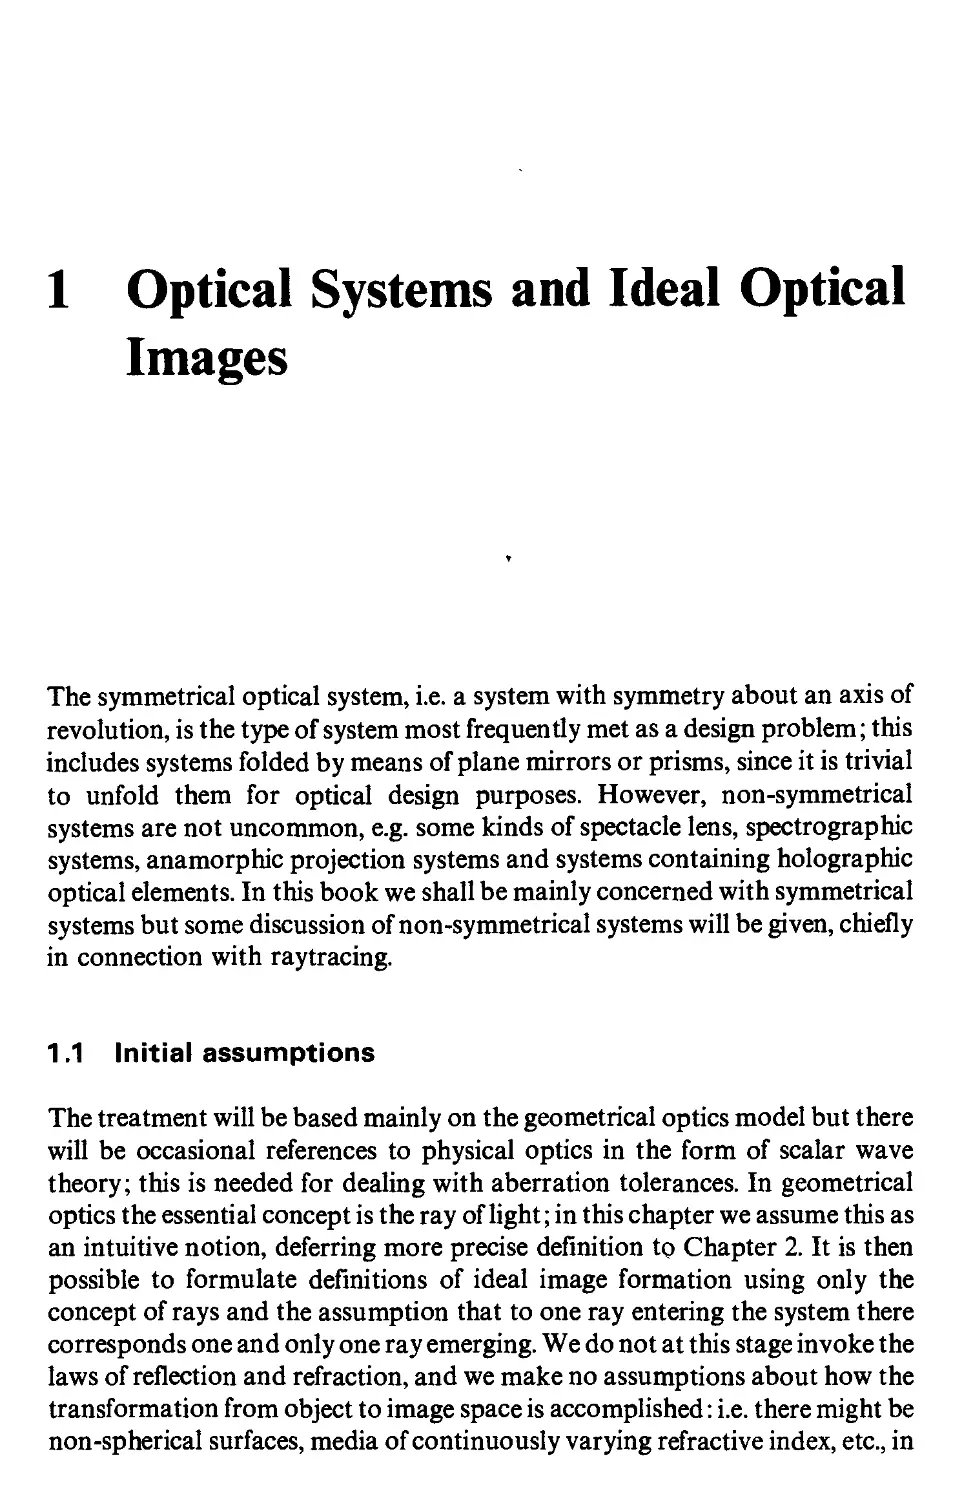 1 Optical systems and ideal optical images